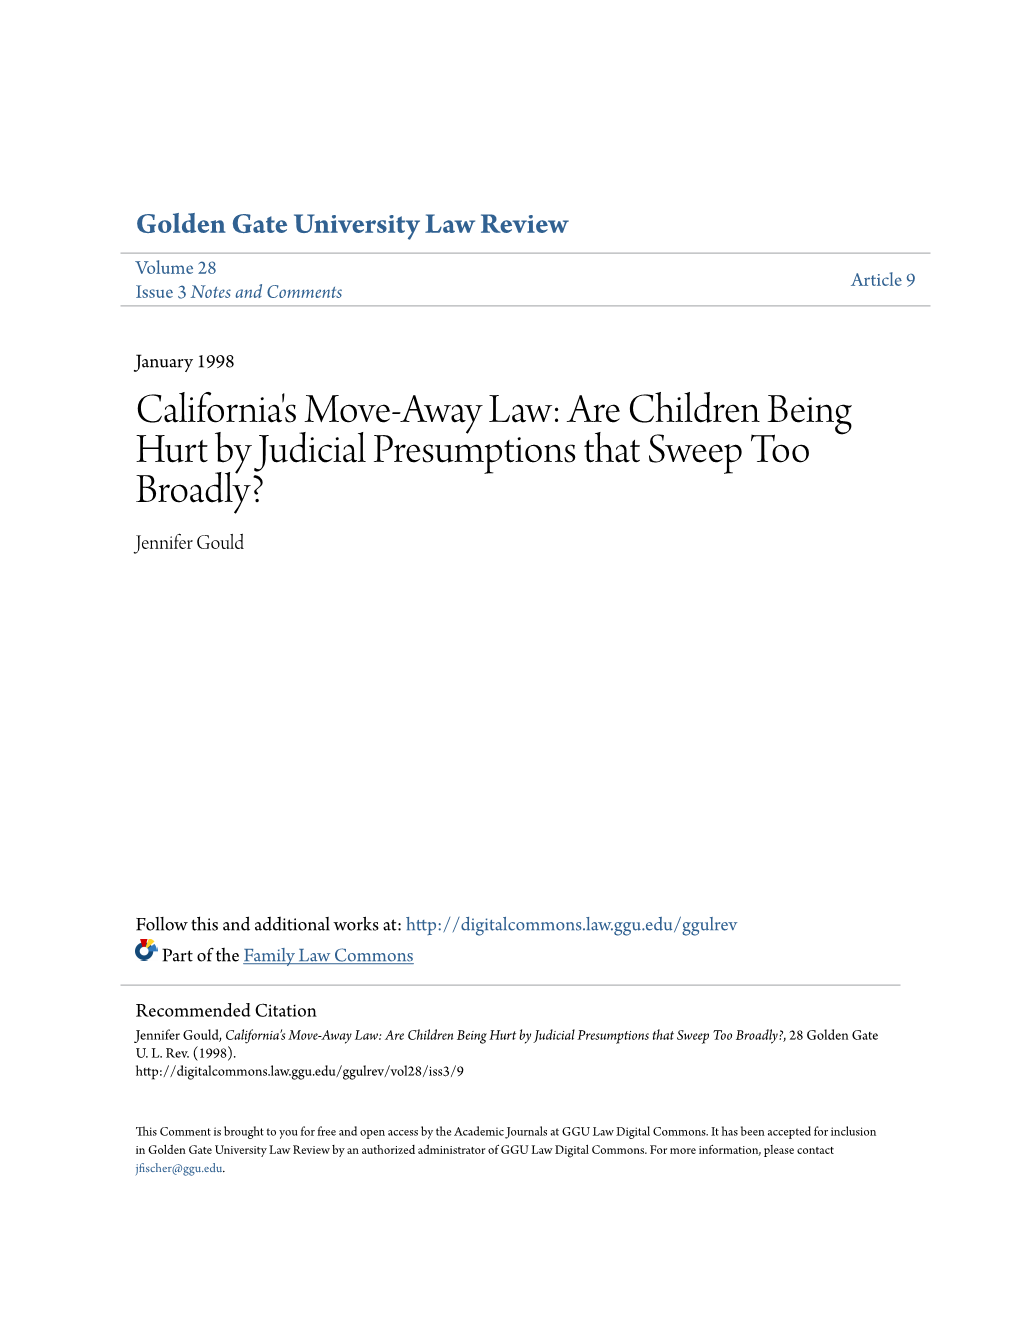 California's Move-Away Law: Are Children Being Hurt by Judicial Presumptions That Sweep Too Broadly? Jennifer Gould